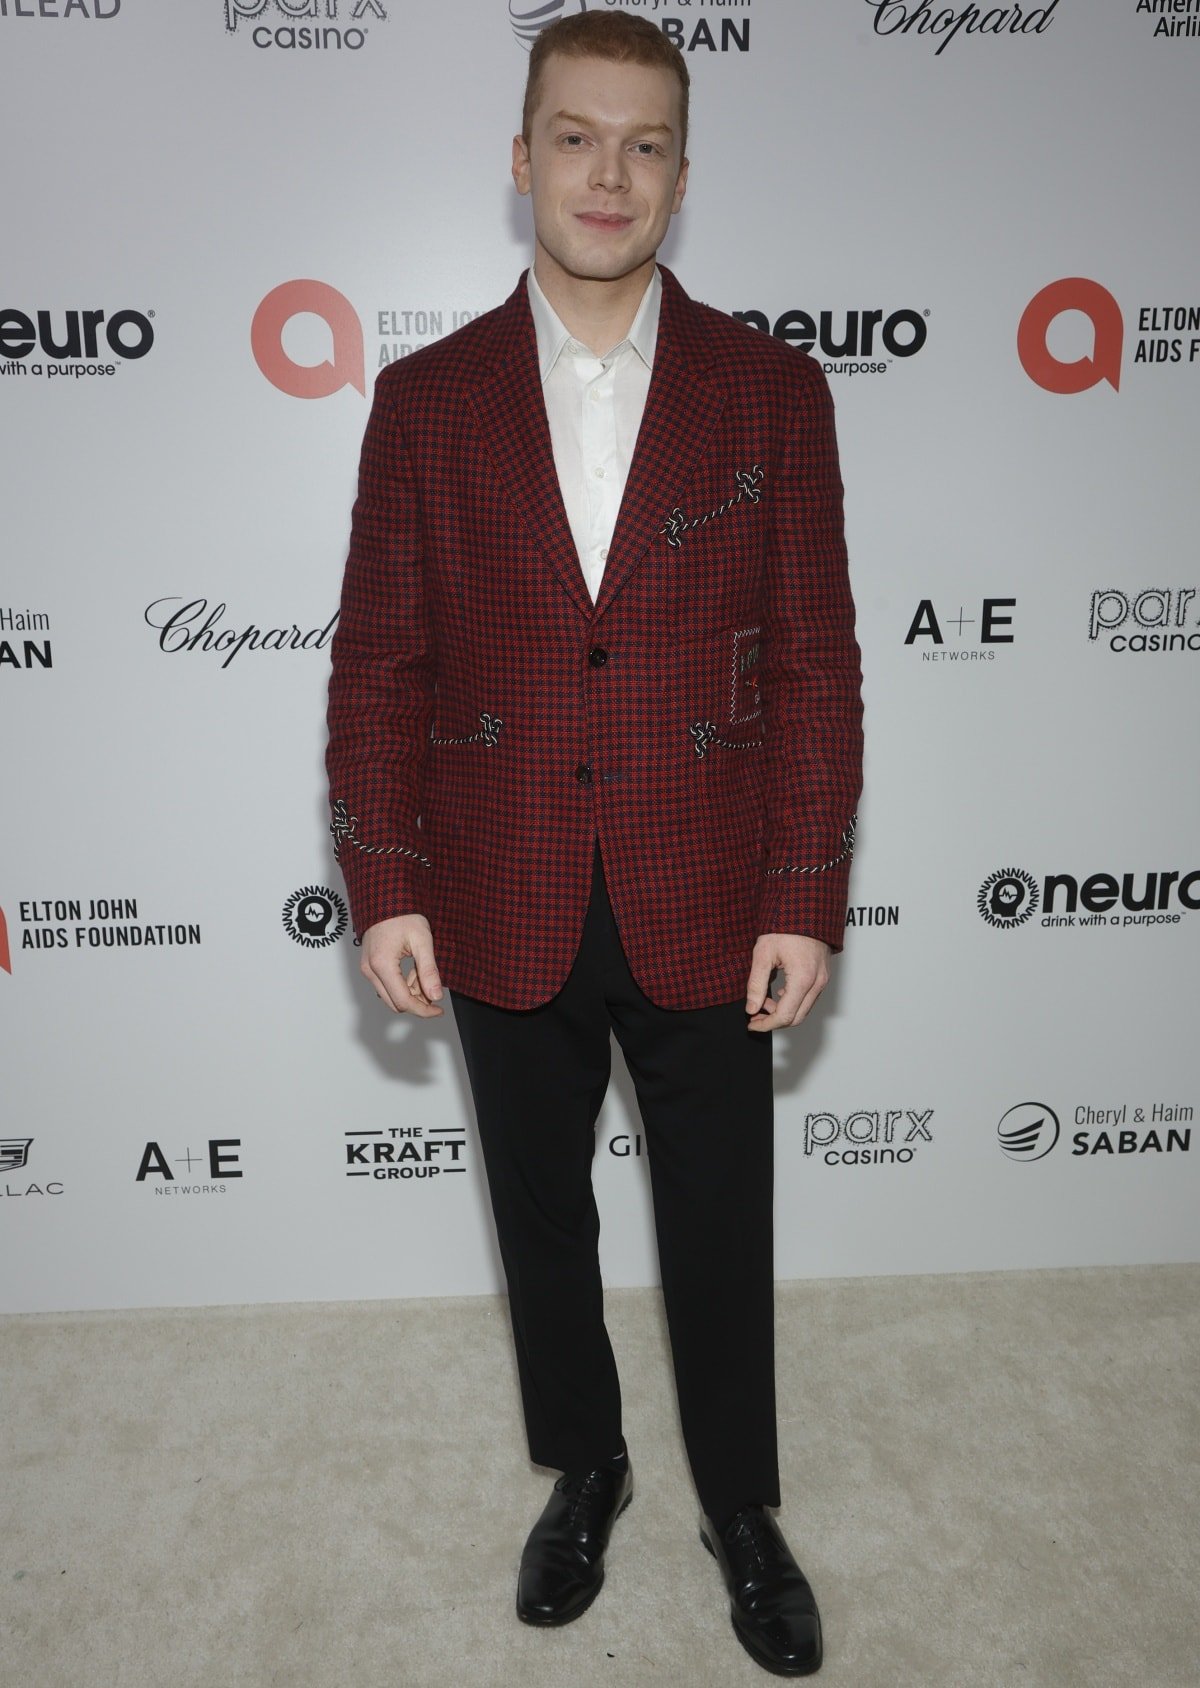 Cameron Monaghan making an appearance at the 31st Annual Elton John AIDS Foundation Academy Awards Viewing Party